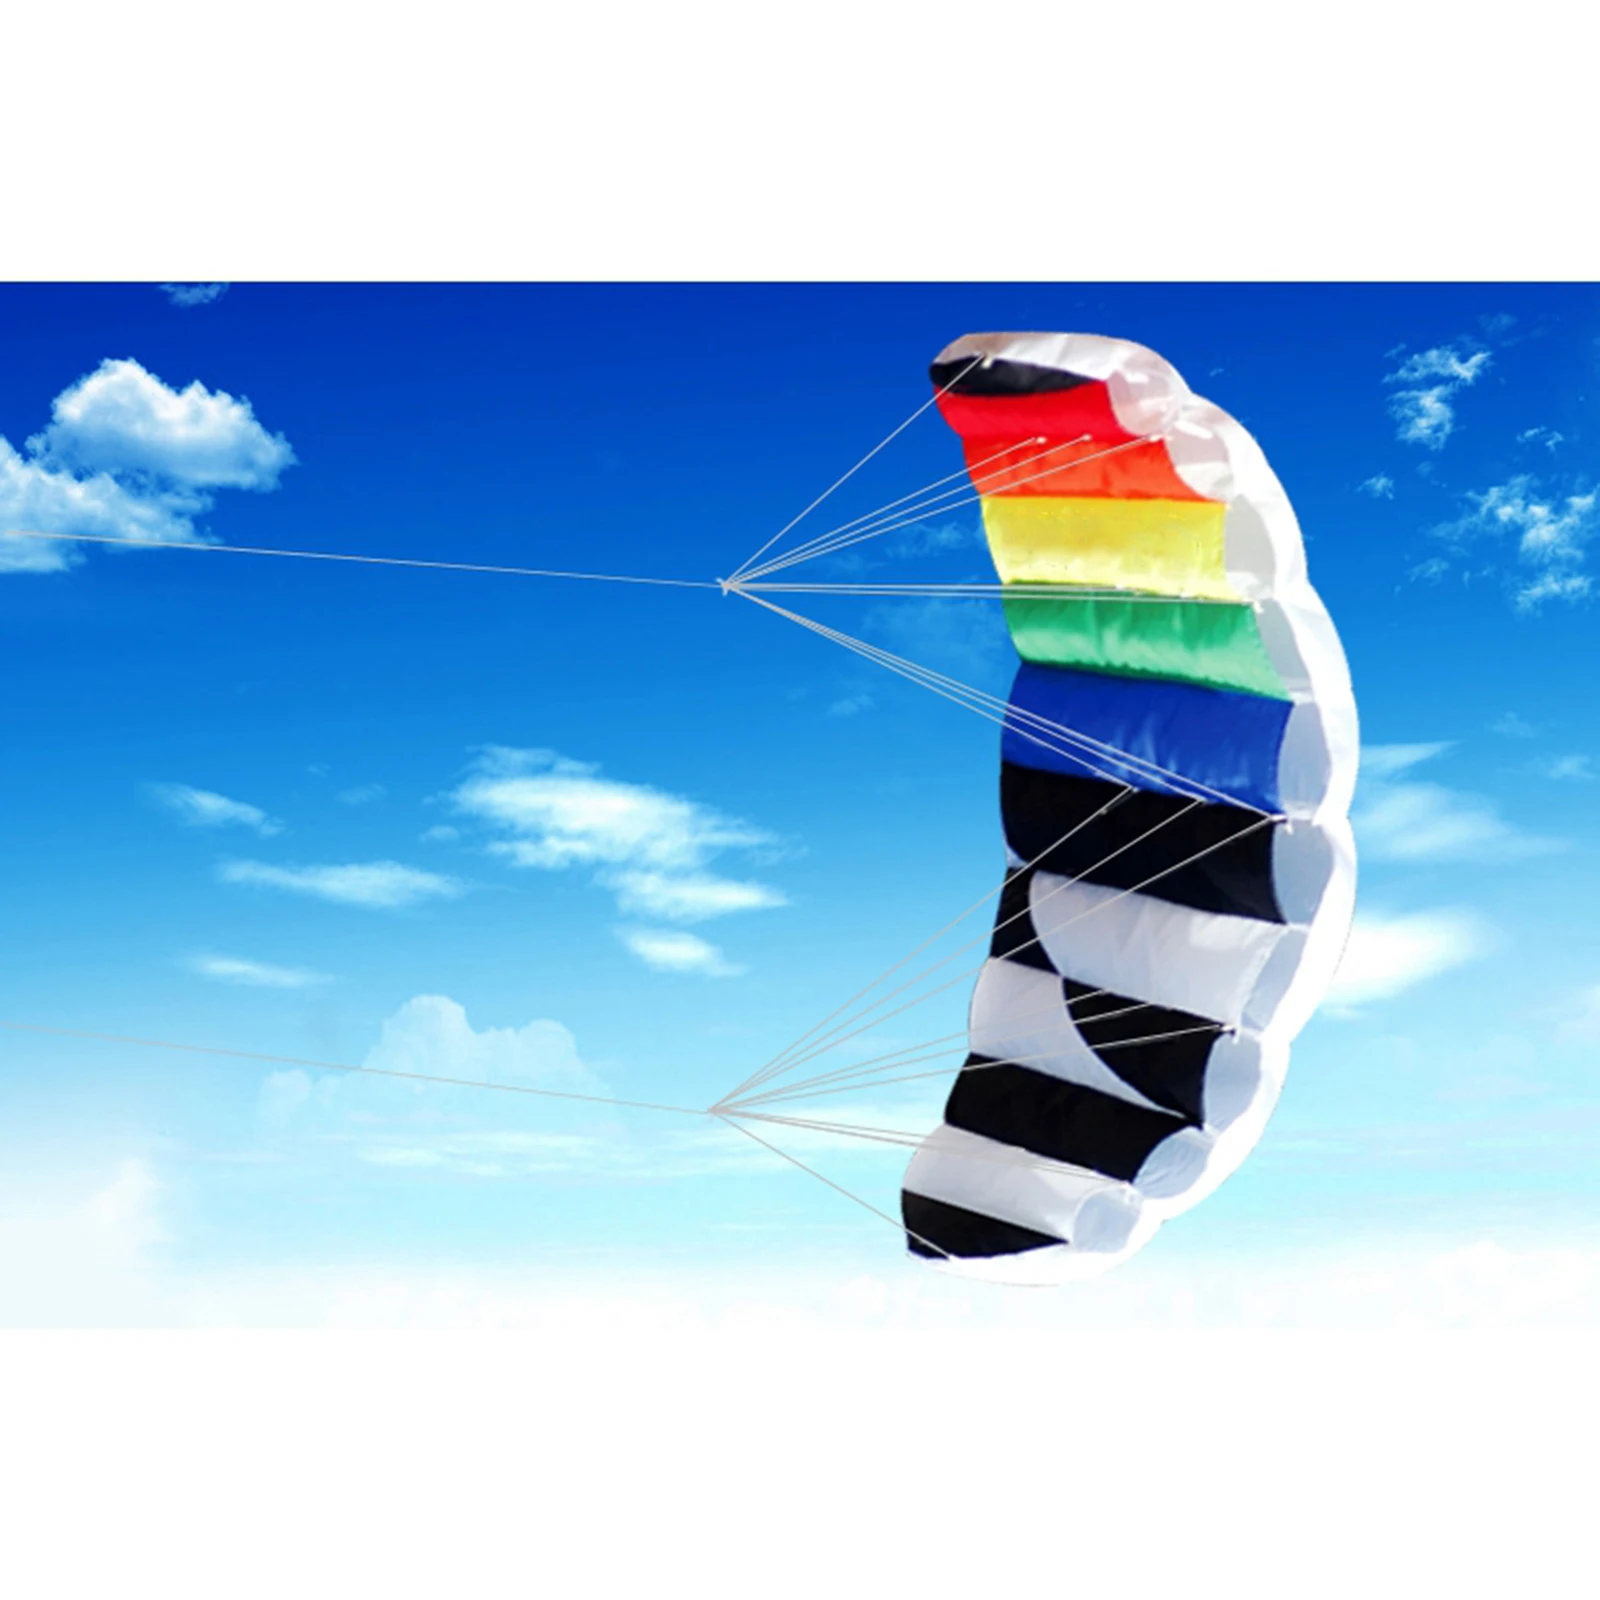 Stunt Power Kite Surfing Parafoil Surfboard Parachute Outside Flying Wing 